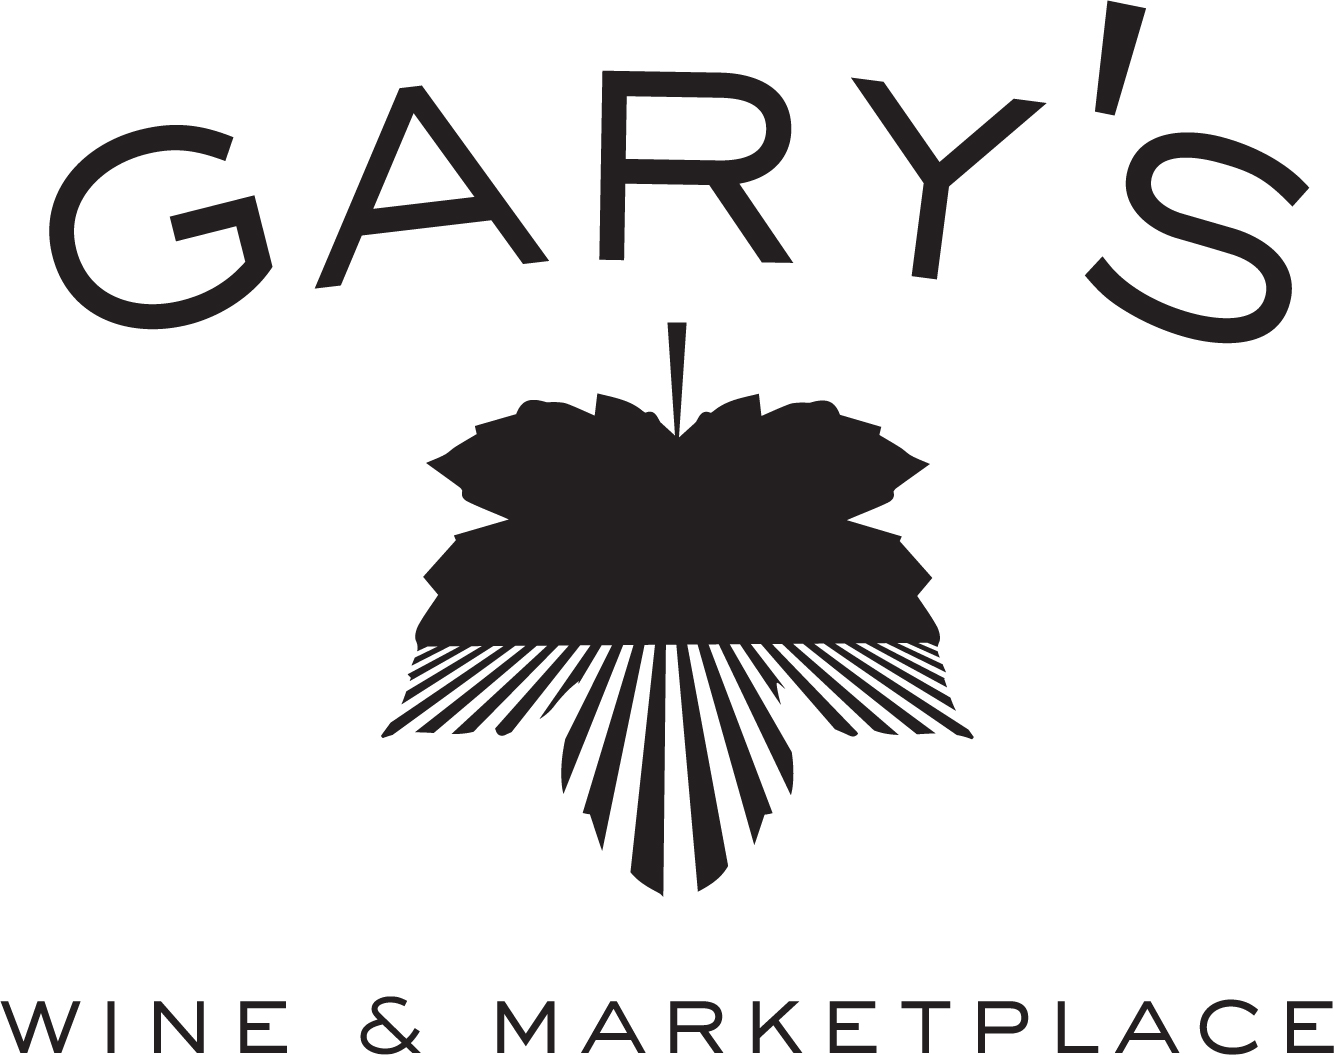 Gary's Wine and Marketplace